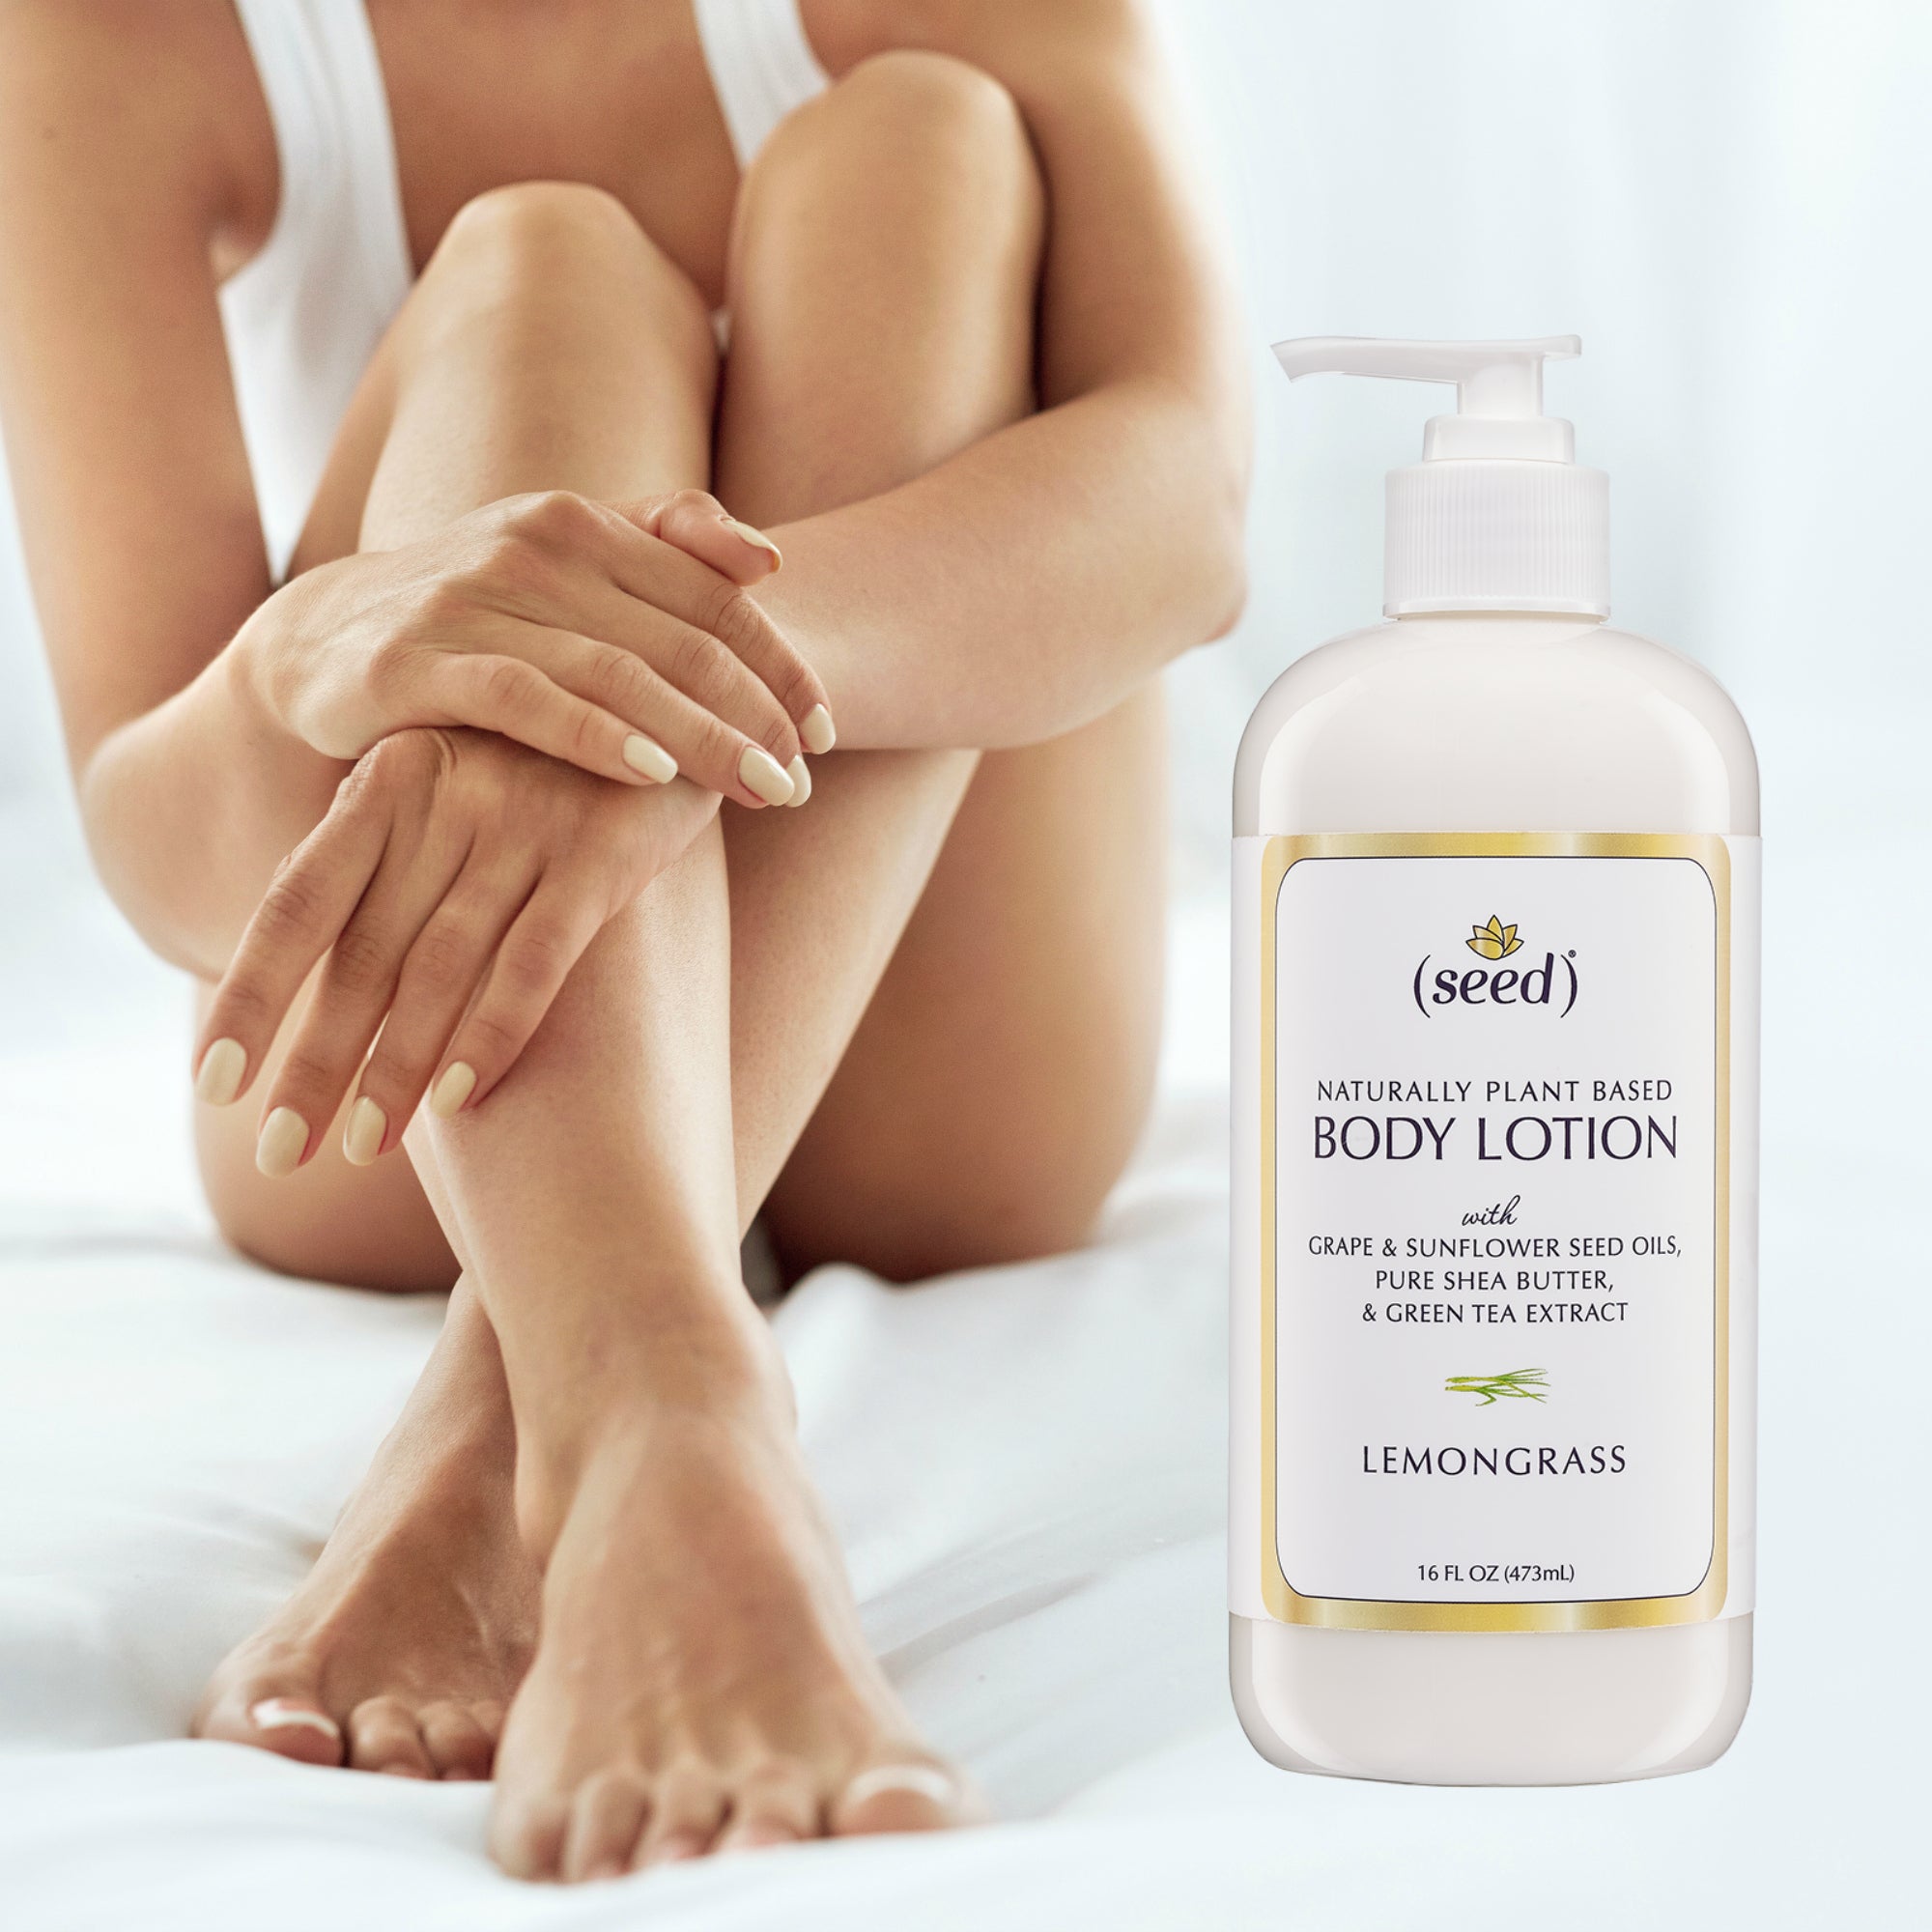 Seed Body Lotion soothes and softens skins all over